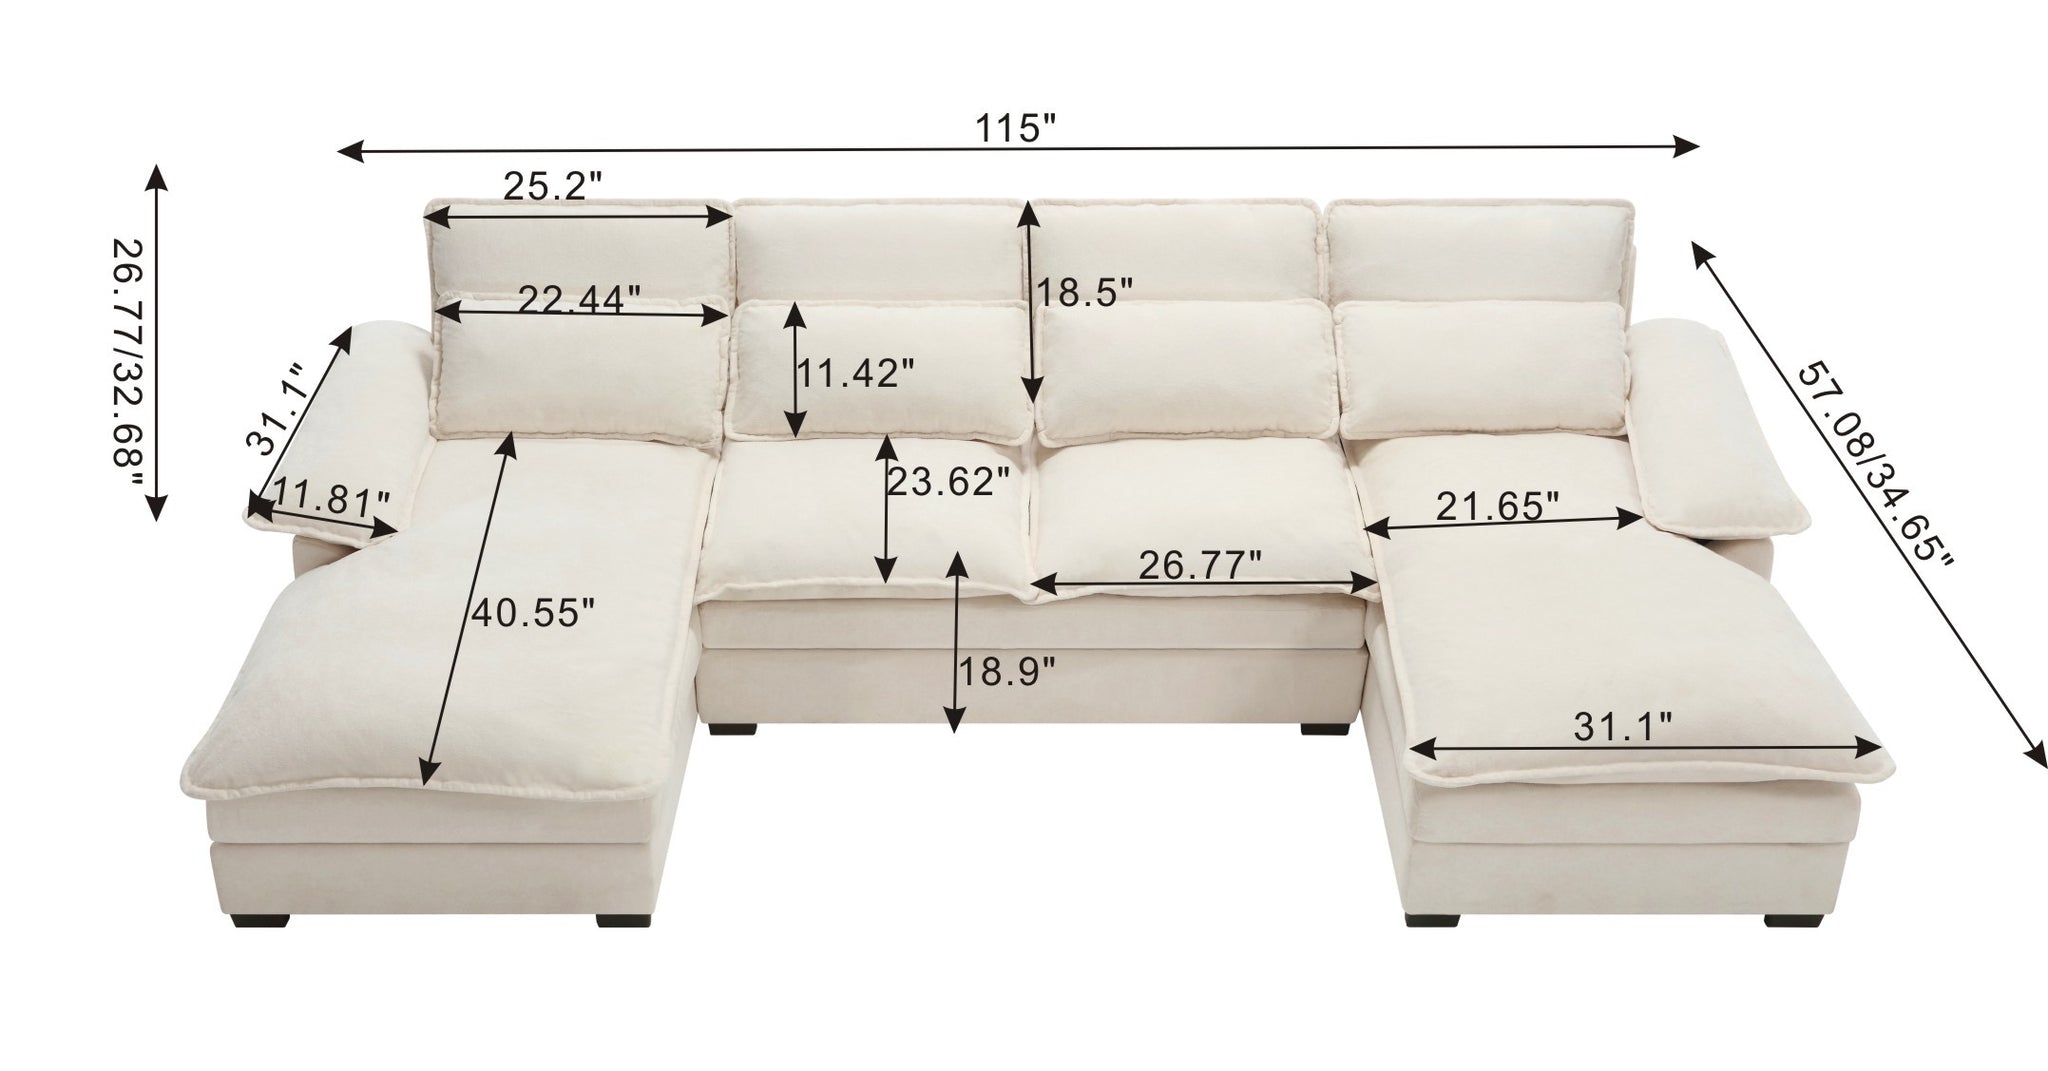 U Shaped Modular Sectional Sofa 6 Deap Seats Corne gray-light brown-polyester-wood-primary living